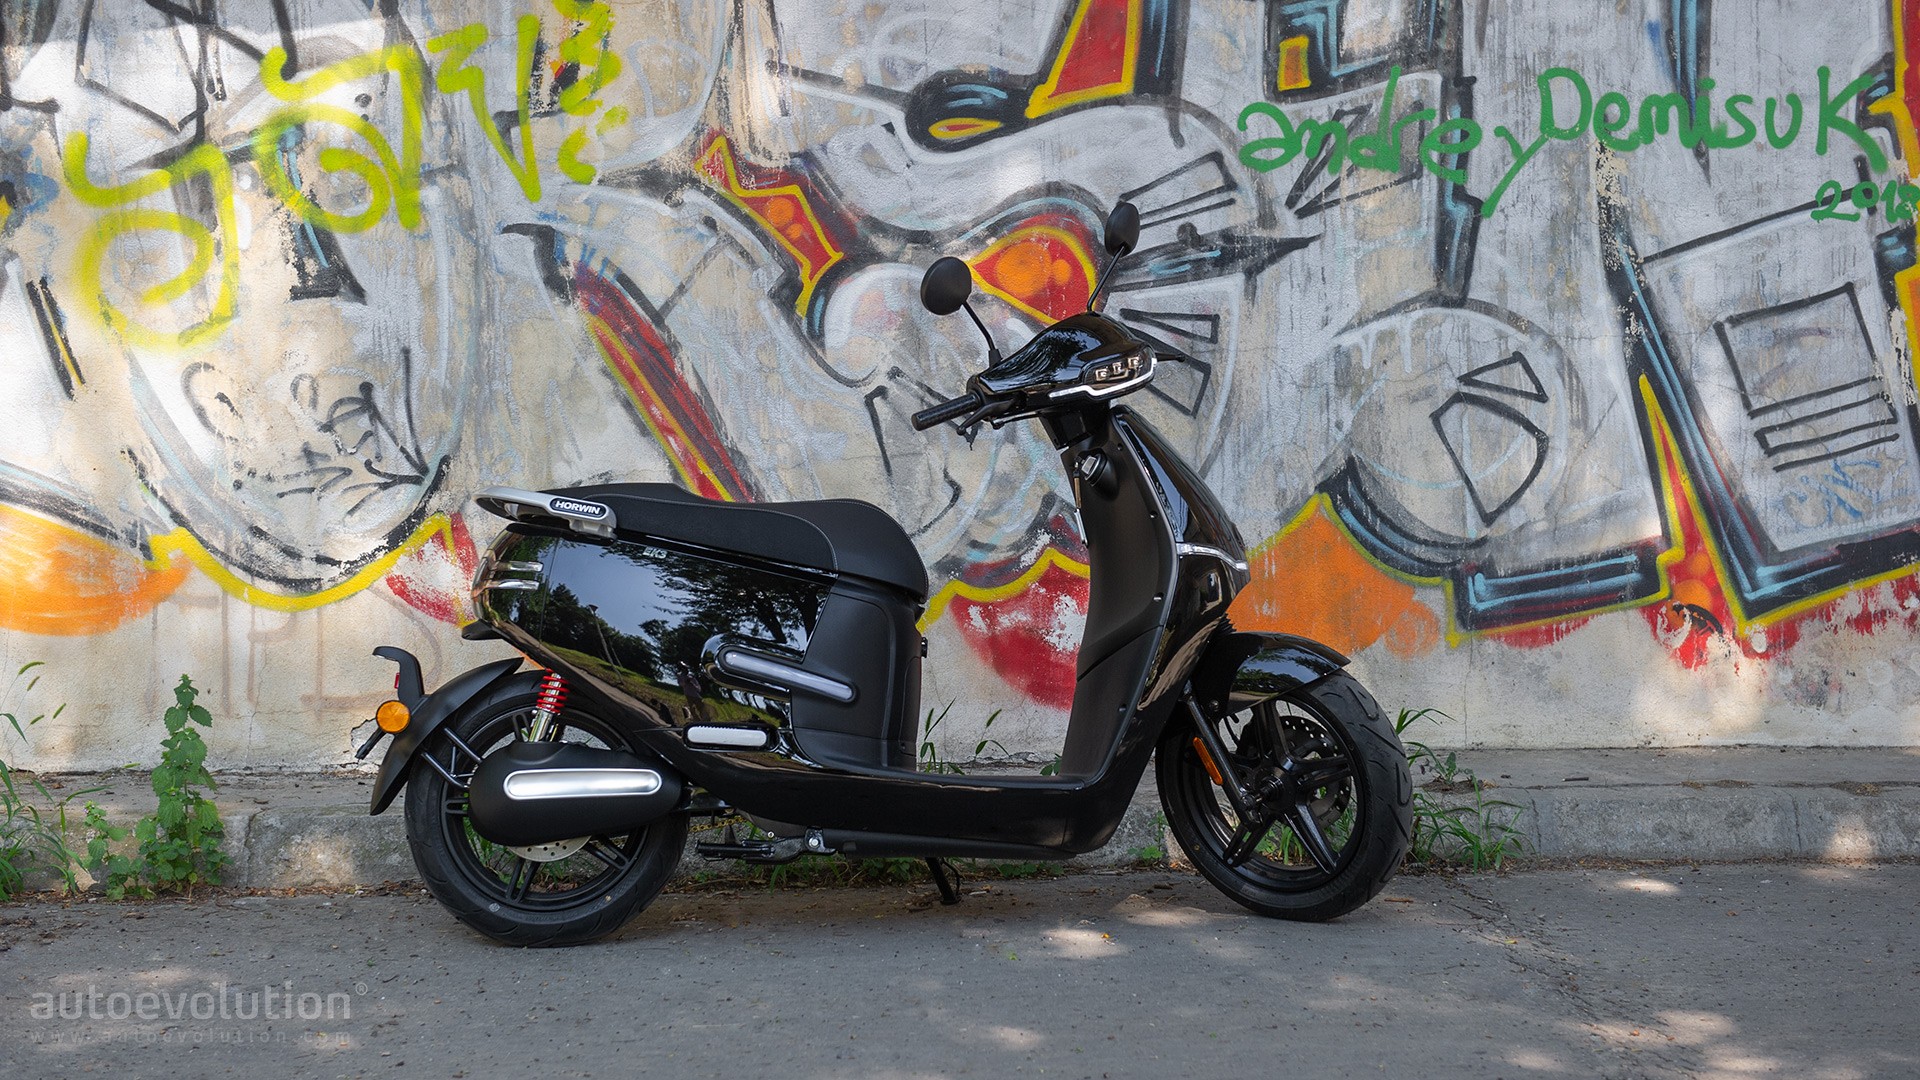 Ridden: Horwin EK3 - Fast, Powerful, Electric Moped With a